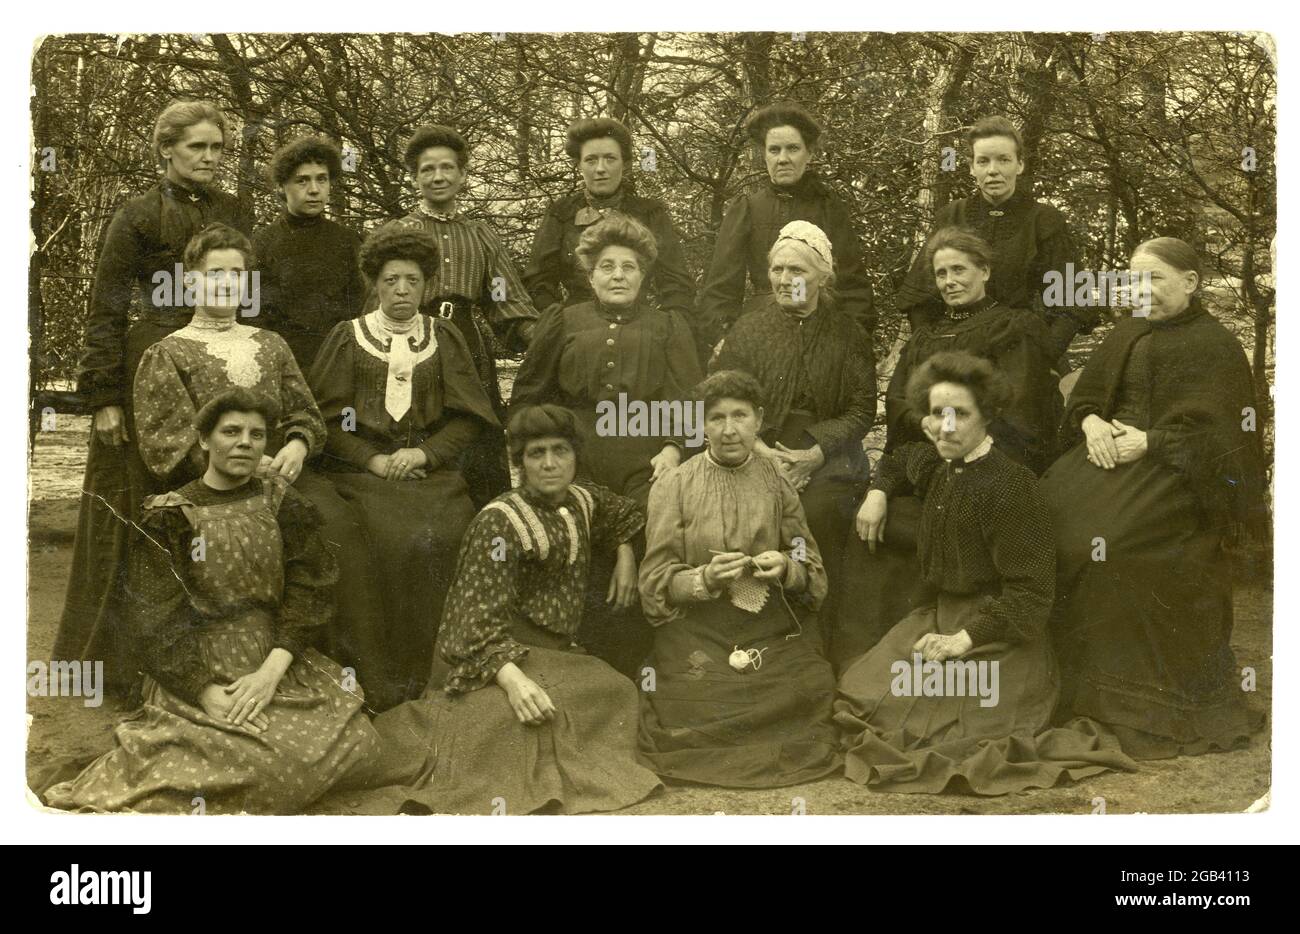 Original Edwardian RPPC (Real photographic postcard) of group of women outdoors, all ages, including elderly and eta black woman, convalescing patients at a hospital, possibly Cookridge Convalescent home,  posted April 1908 Horsforth, Leeds, U.K. Stock Photo